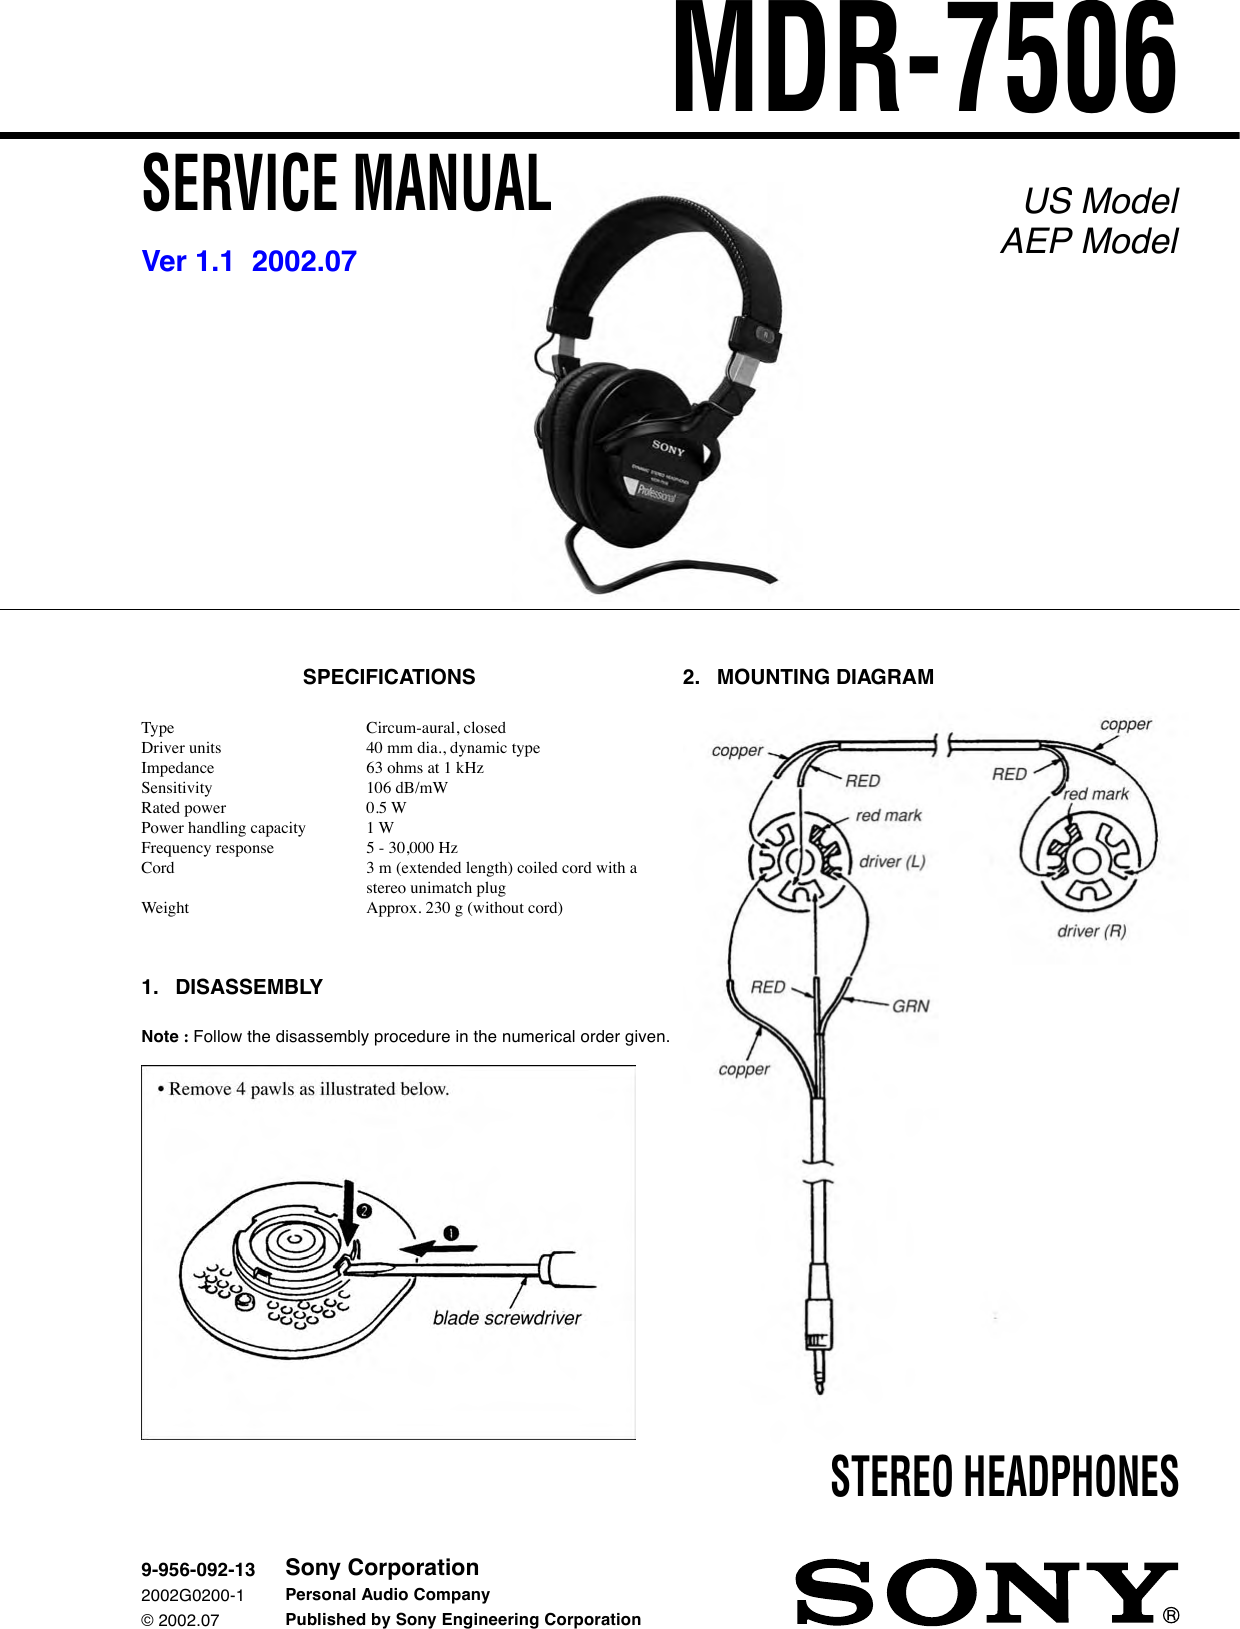 Page 1 of 4 - Sony Sony-Sony-Headphones-Mdr-7506-Users-Manual- MDR-7506 Service Manual And Repair Parts List  Sony-sony-headphones-mdr-7506-users-manual